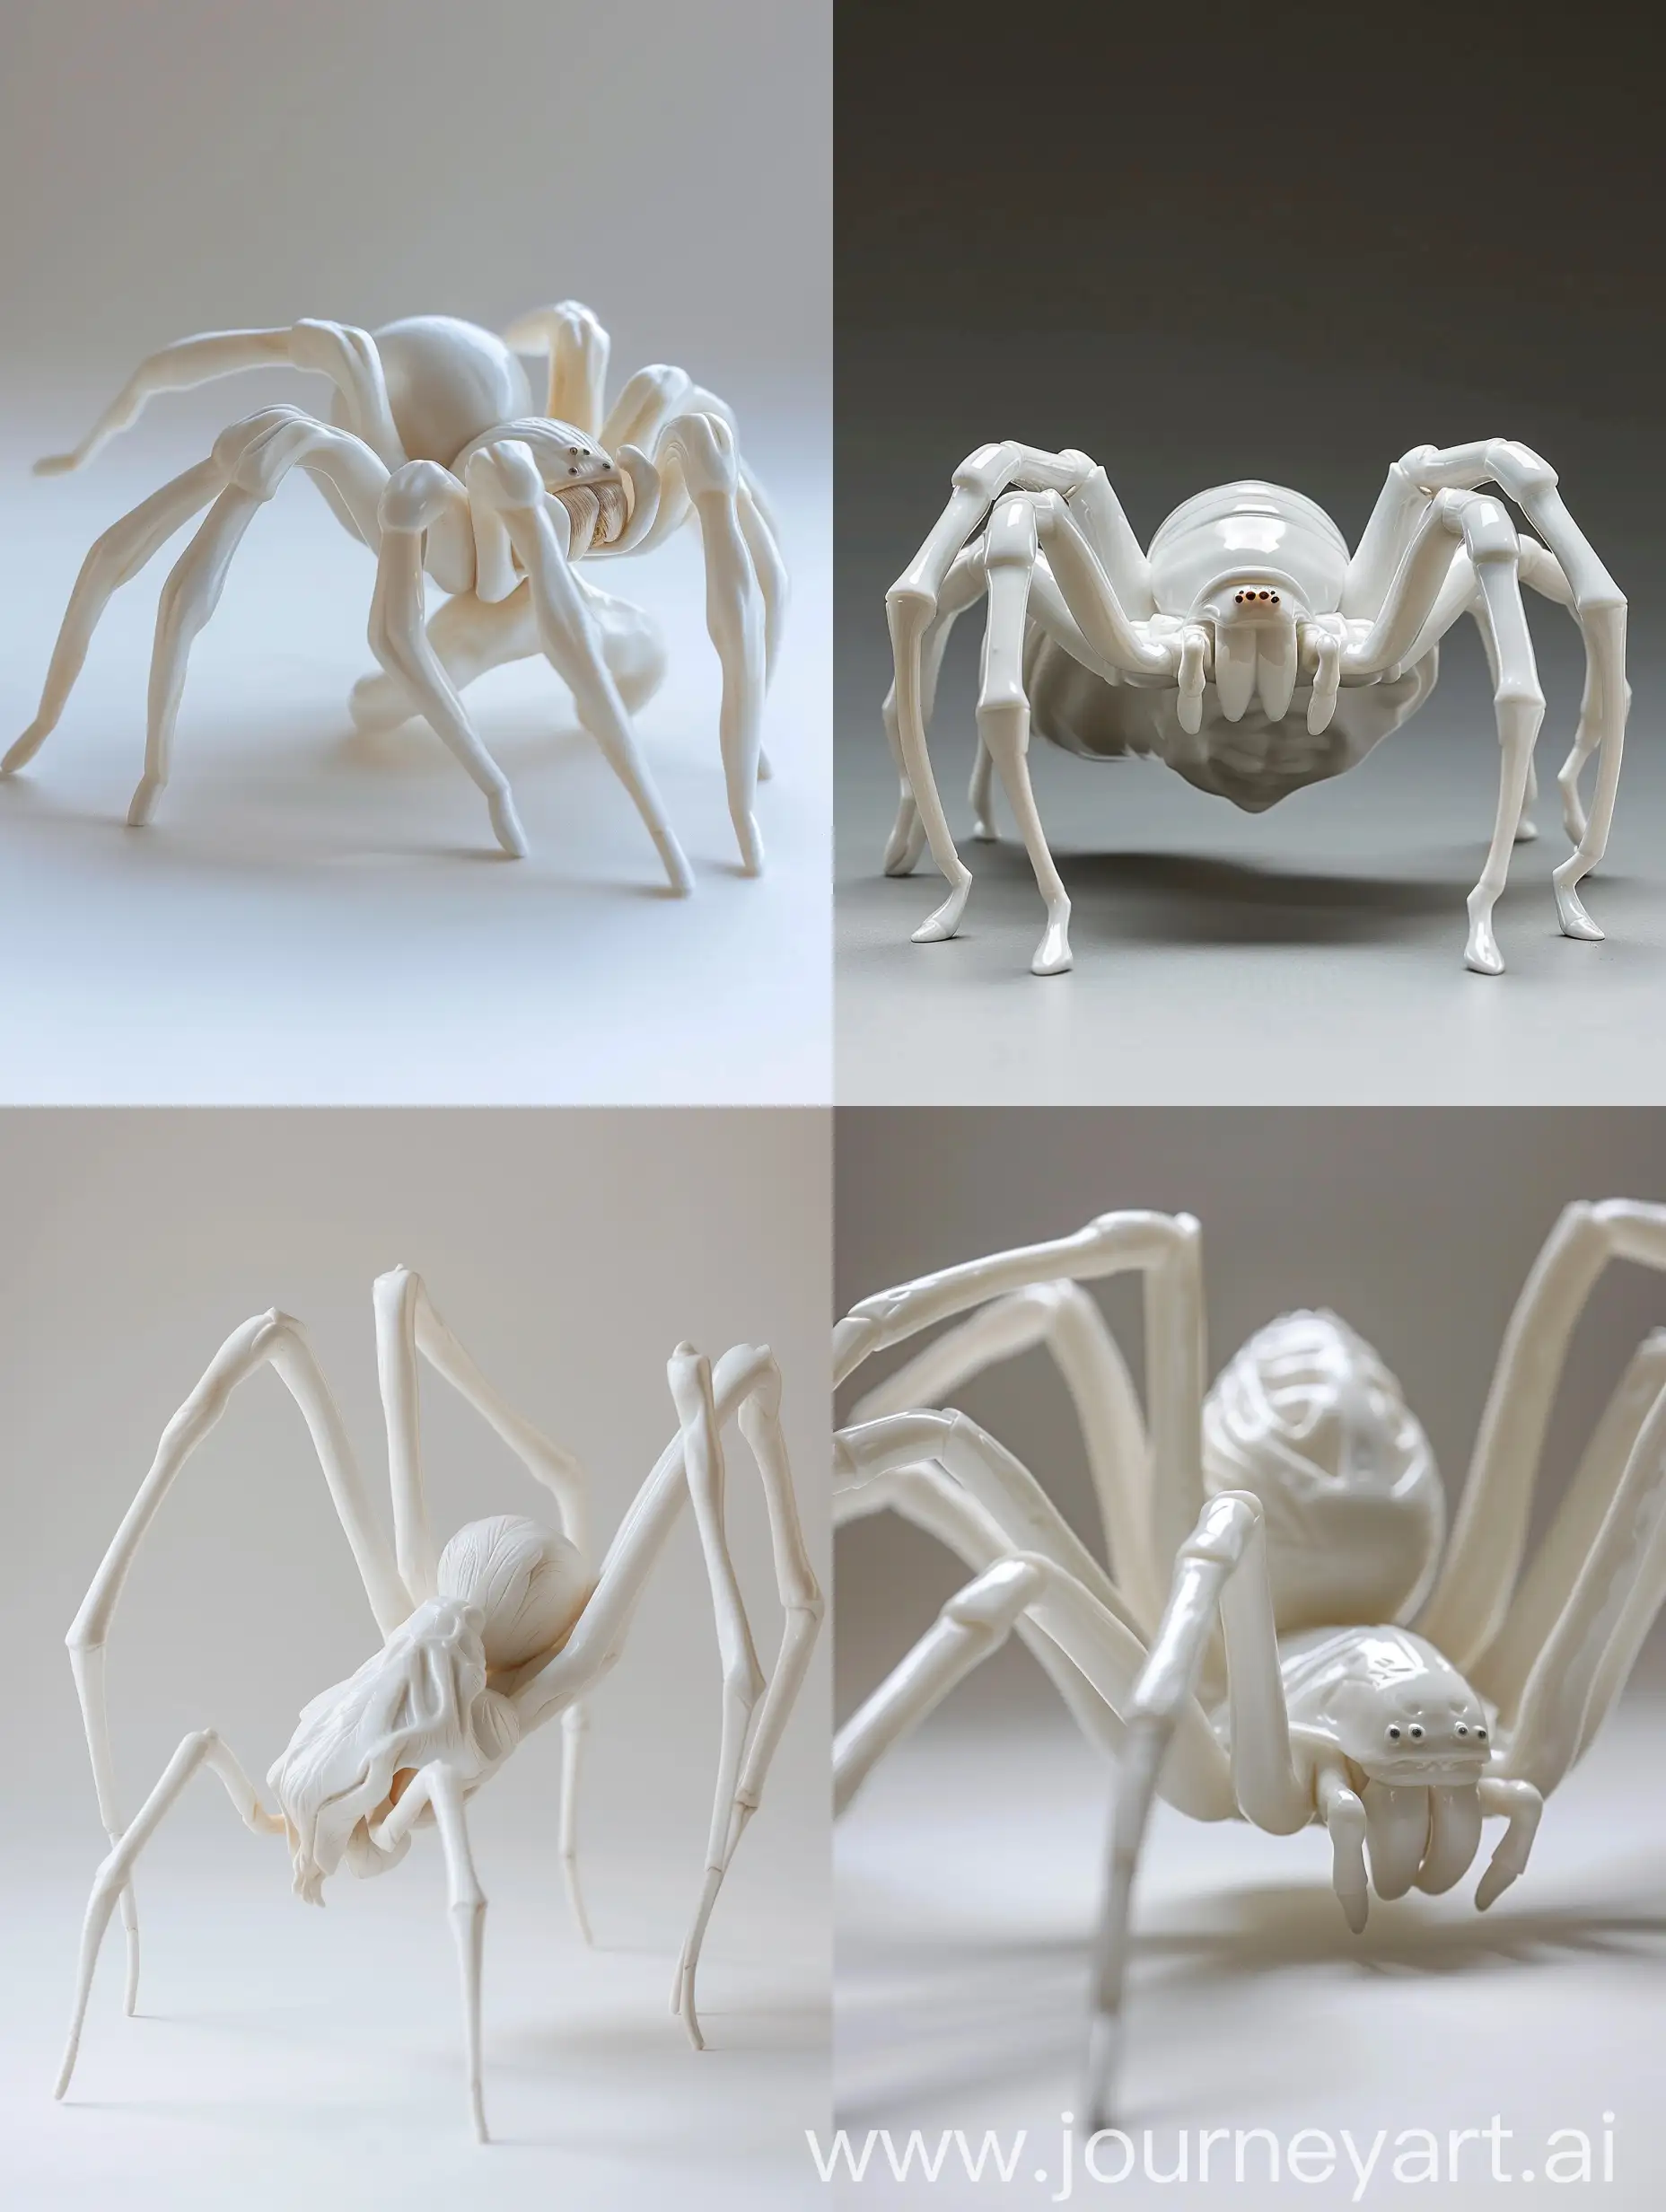 A porcelain sculpture of a spider crafted in the traditional Japanese style, meticulously capturing the essence of porcelain craftsmanship. The spider's delicate porcelain form reflects the elegance and precision of Japanese artistry. Its intricate details evoke a sense of refinement and grace, paying homage to the rich tradition of porcelain-making in Japan. This piece serves as a testament to the beauty and sophistication of Japanese porcelain art, showcasing the timeless allure of this ancient craft